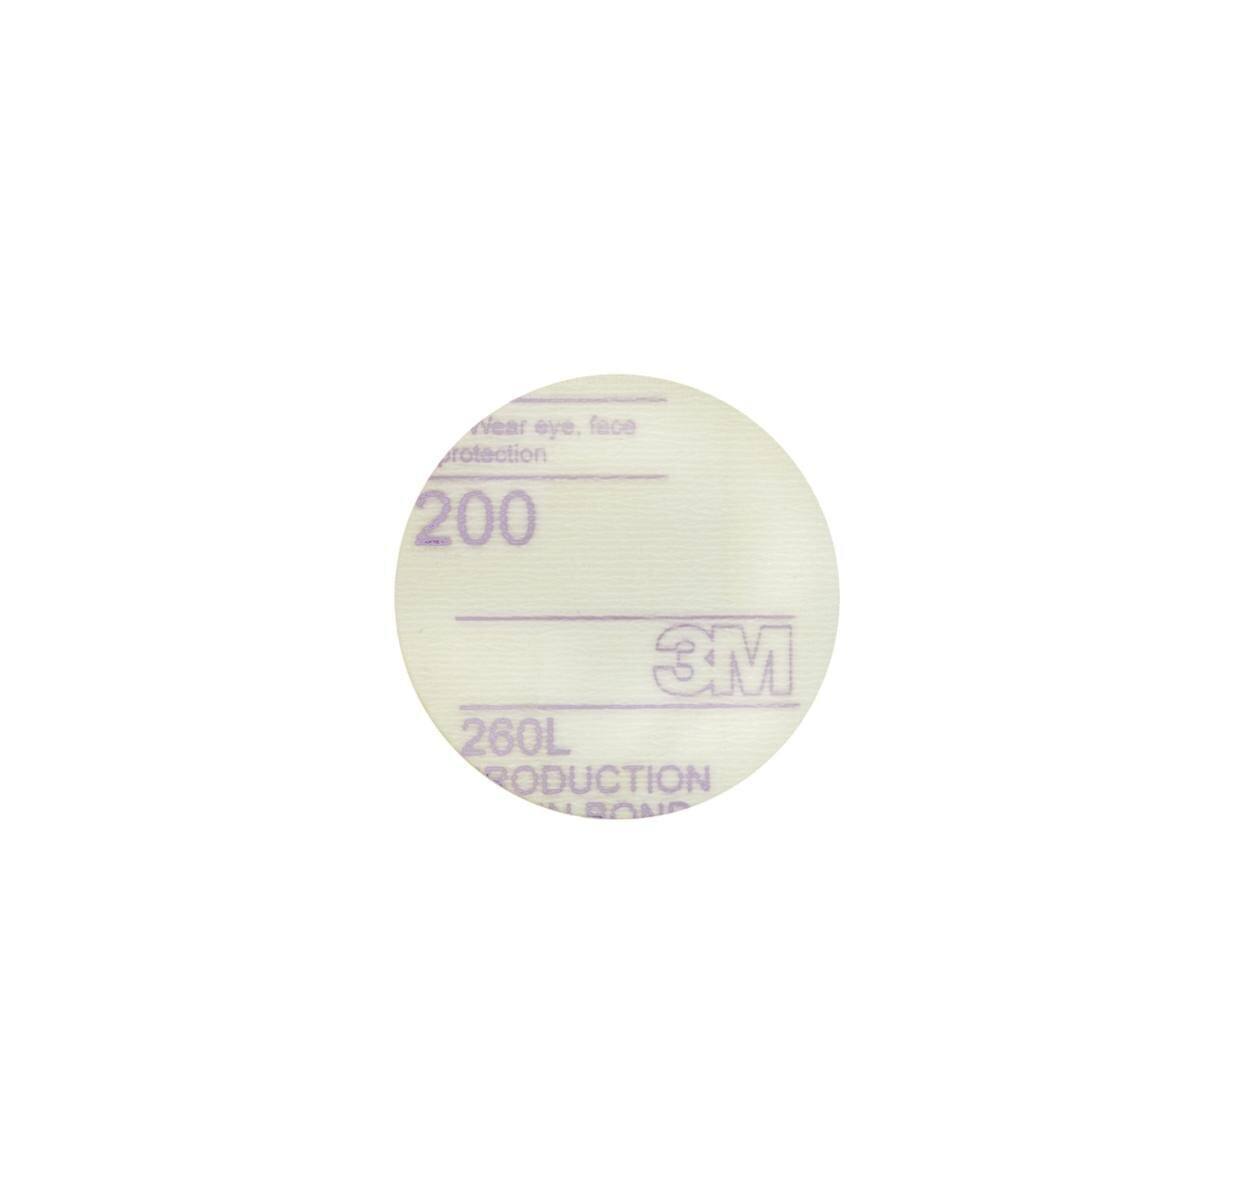 3M Hookit Velcro-backed disc 260L, white, 76 mm, P1200, non-perforated #E00908